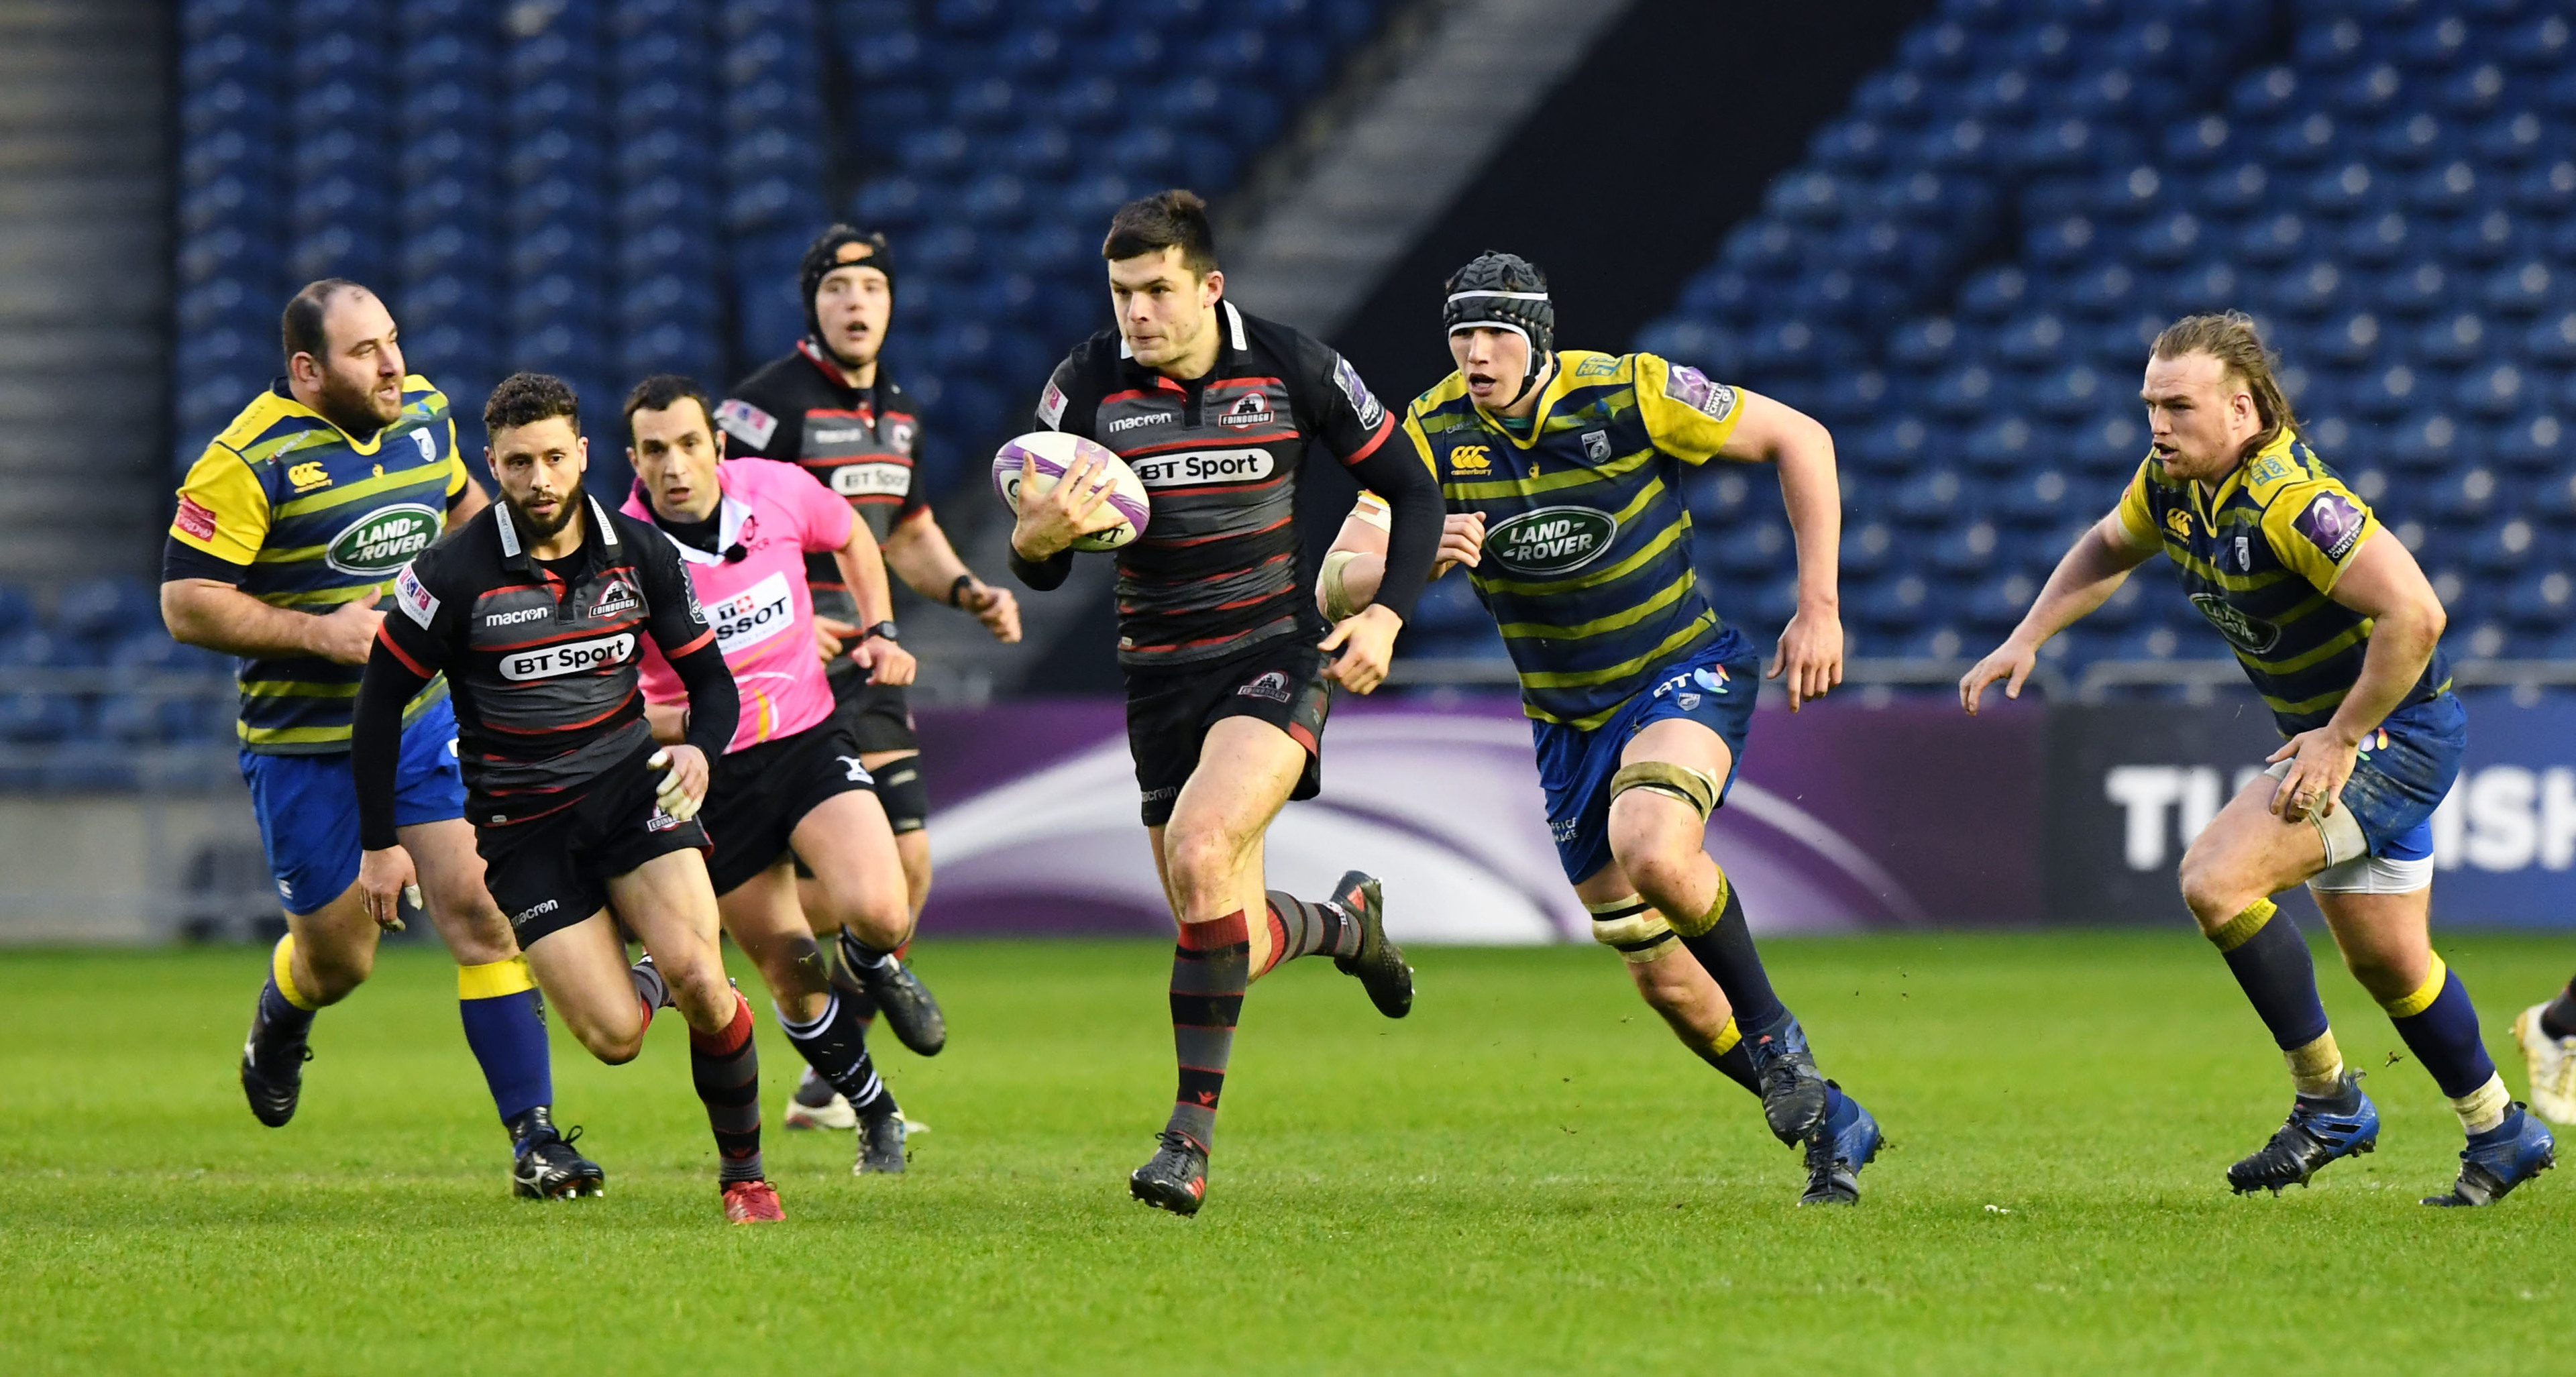 Blair Kinghorn's running was the only bright spark in a  disappointing Edinburgh display.